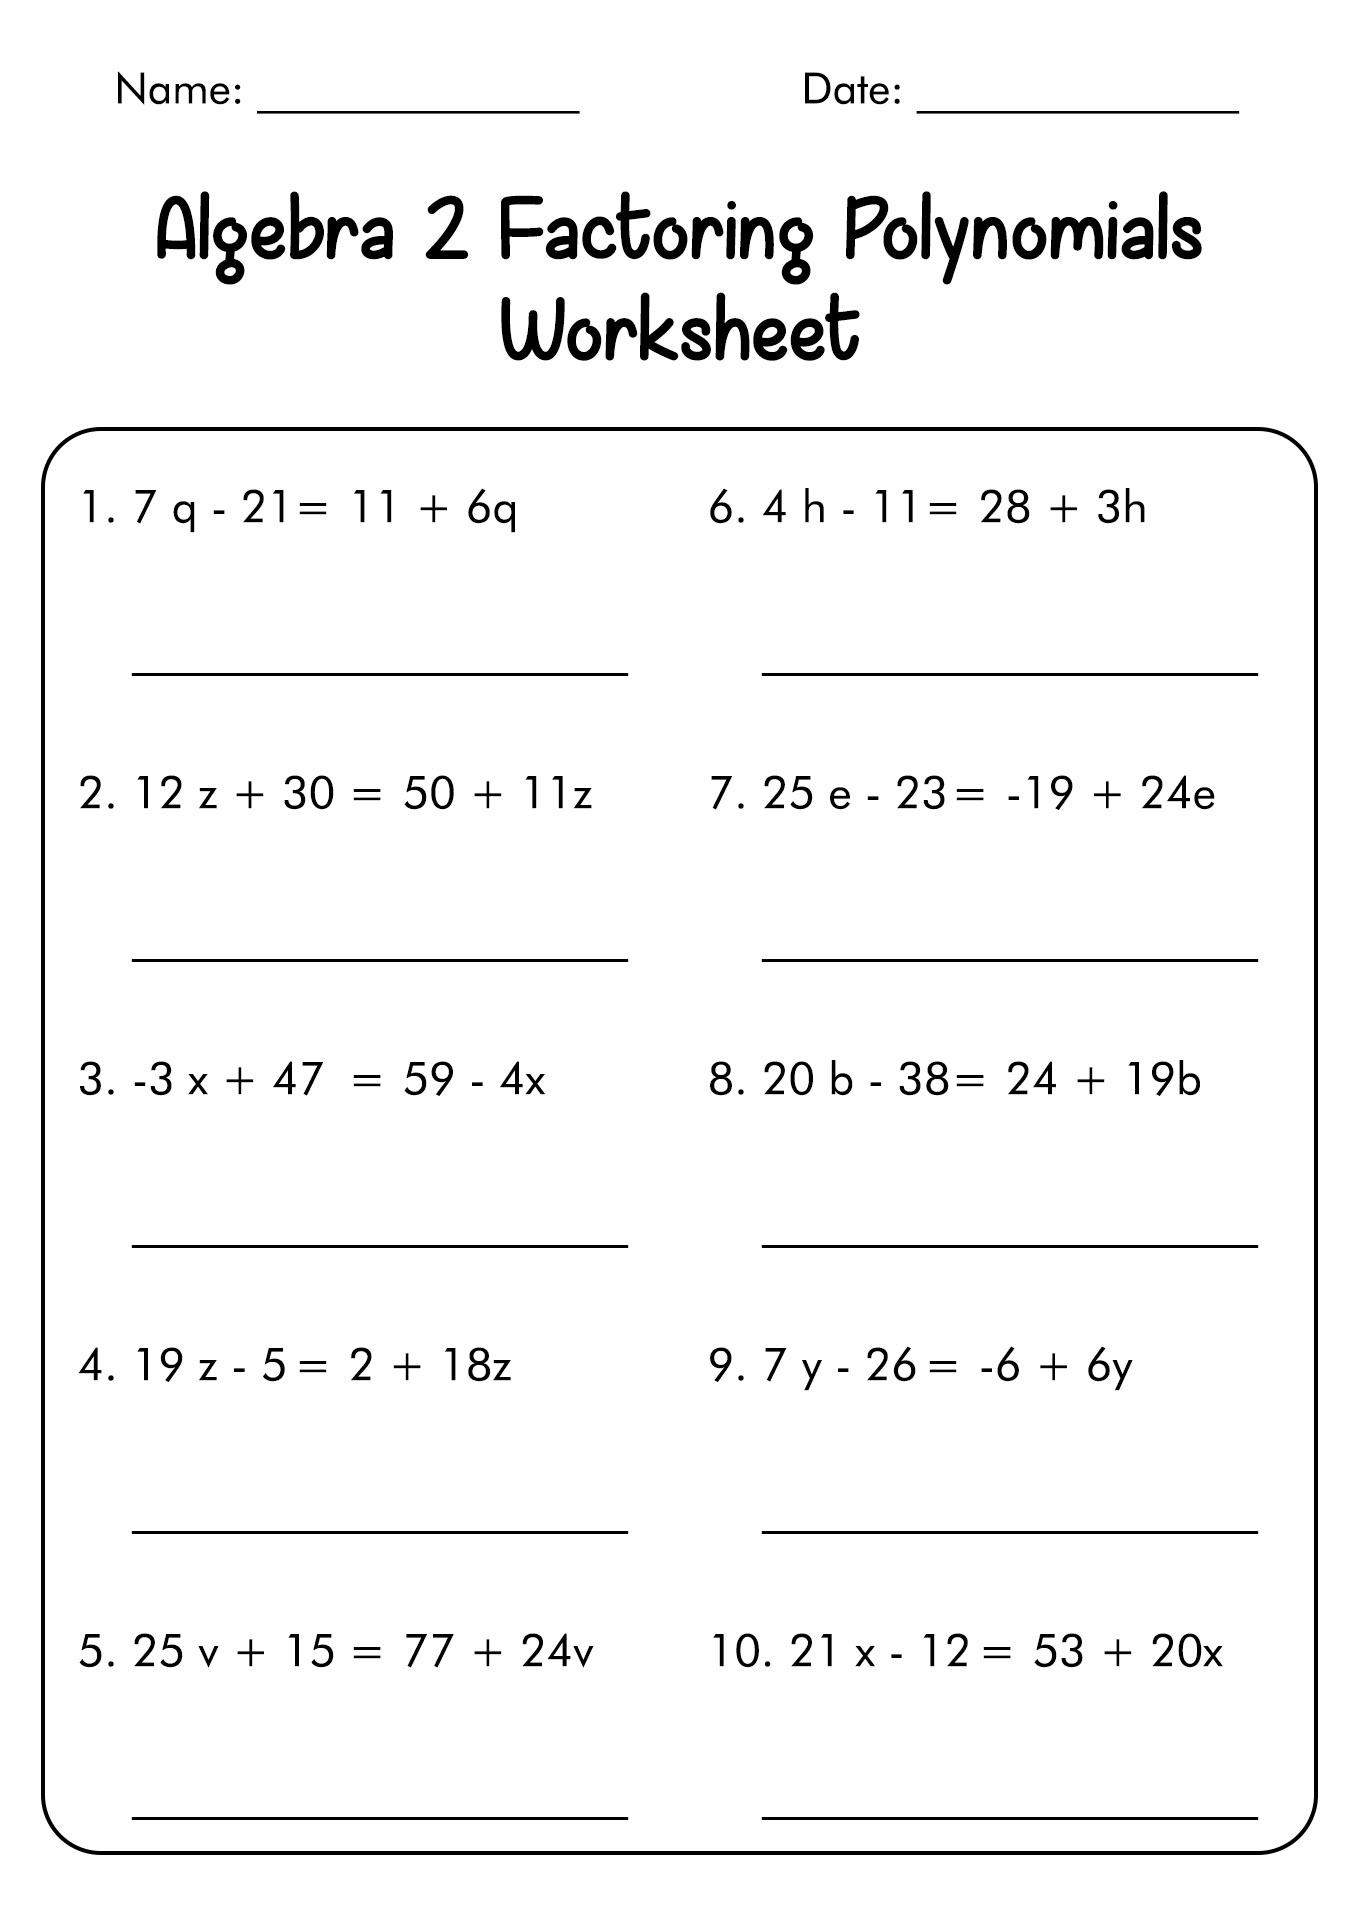 10-best-images-of-factoring-polynomials-practice-worksheet-and-answers-factoring-polynomials